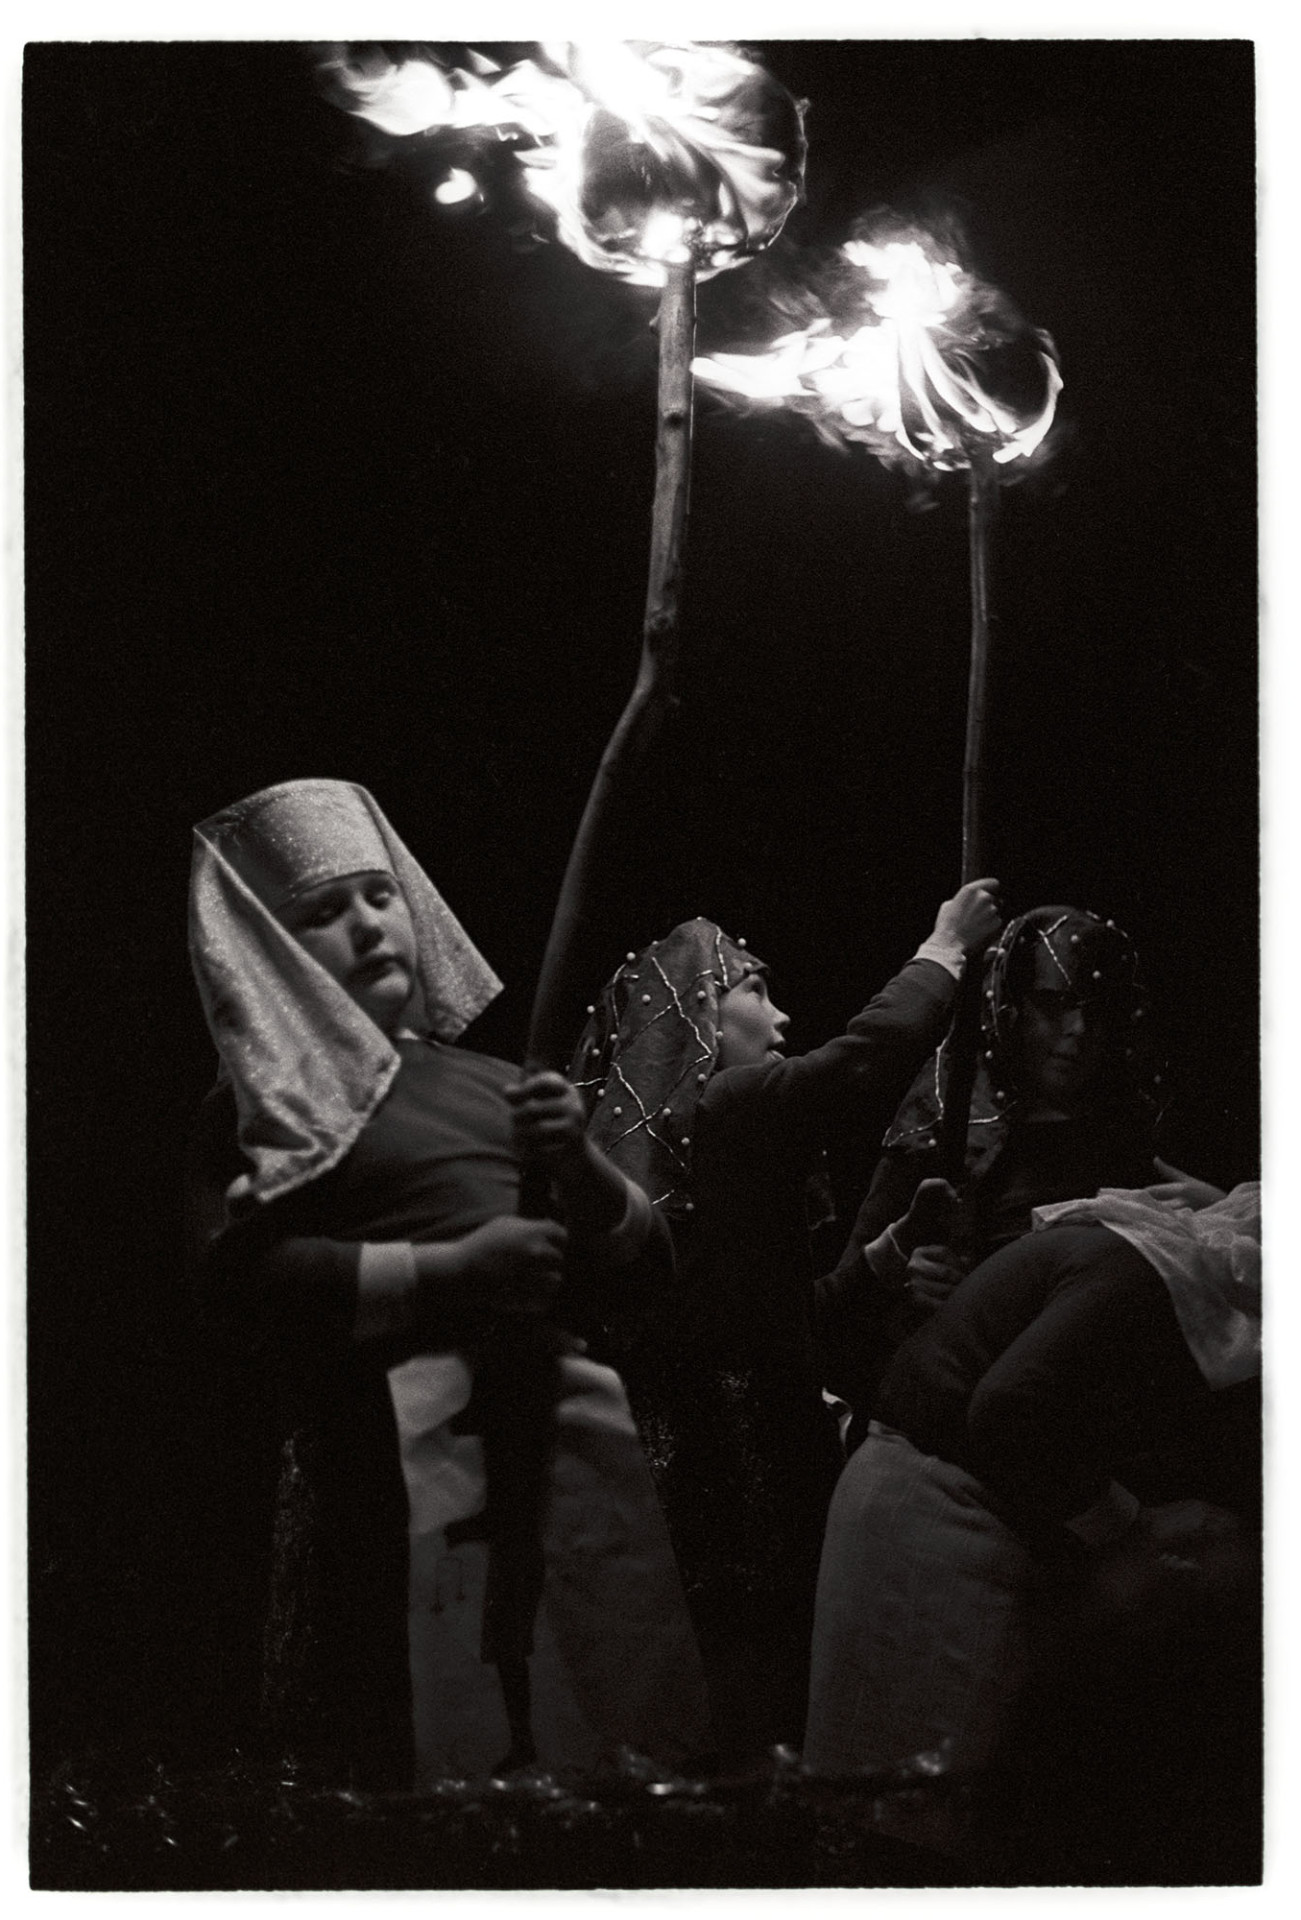 Boys with flaming torches at night.
[Children carrying flaming torches with the 'Tutankhamun' carnival float at Dolton Carnival.]